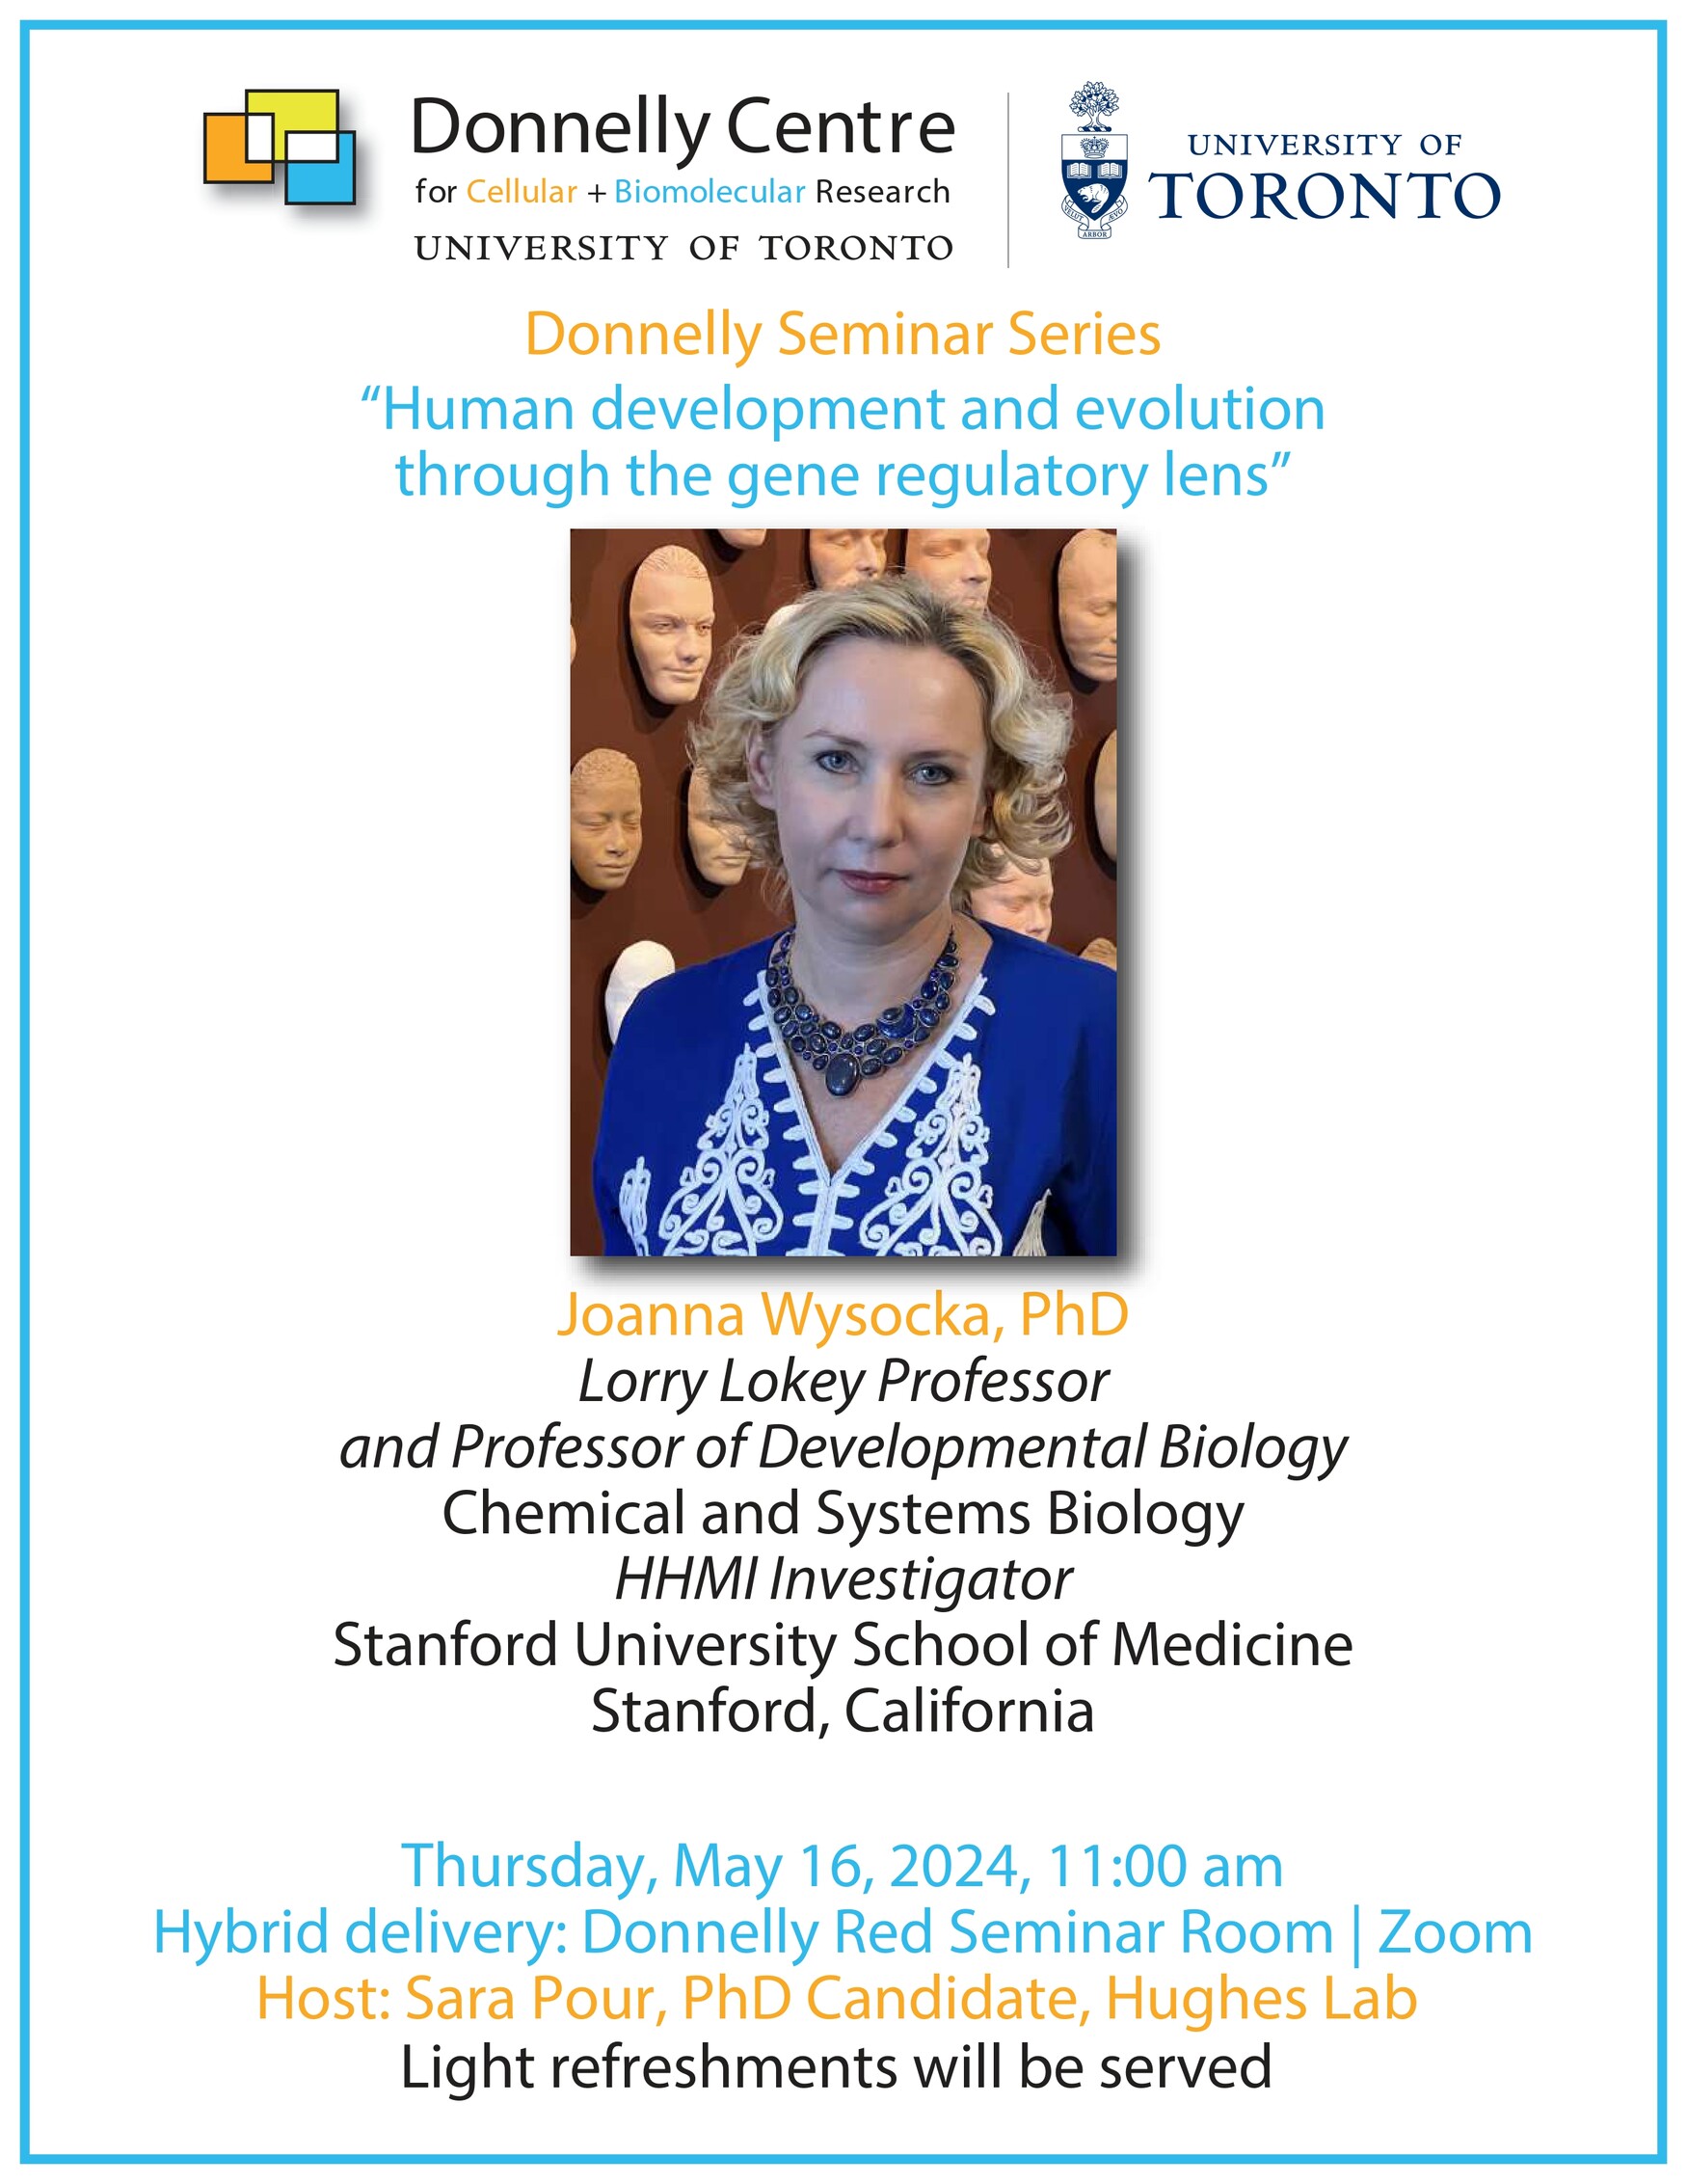 Poster for Donnelly Centre Seminar on "Human development and evolution"